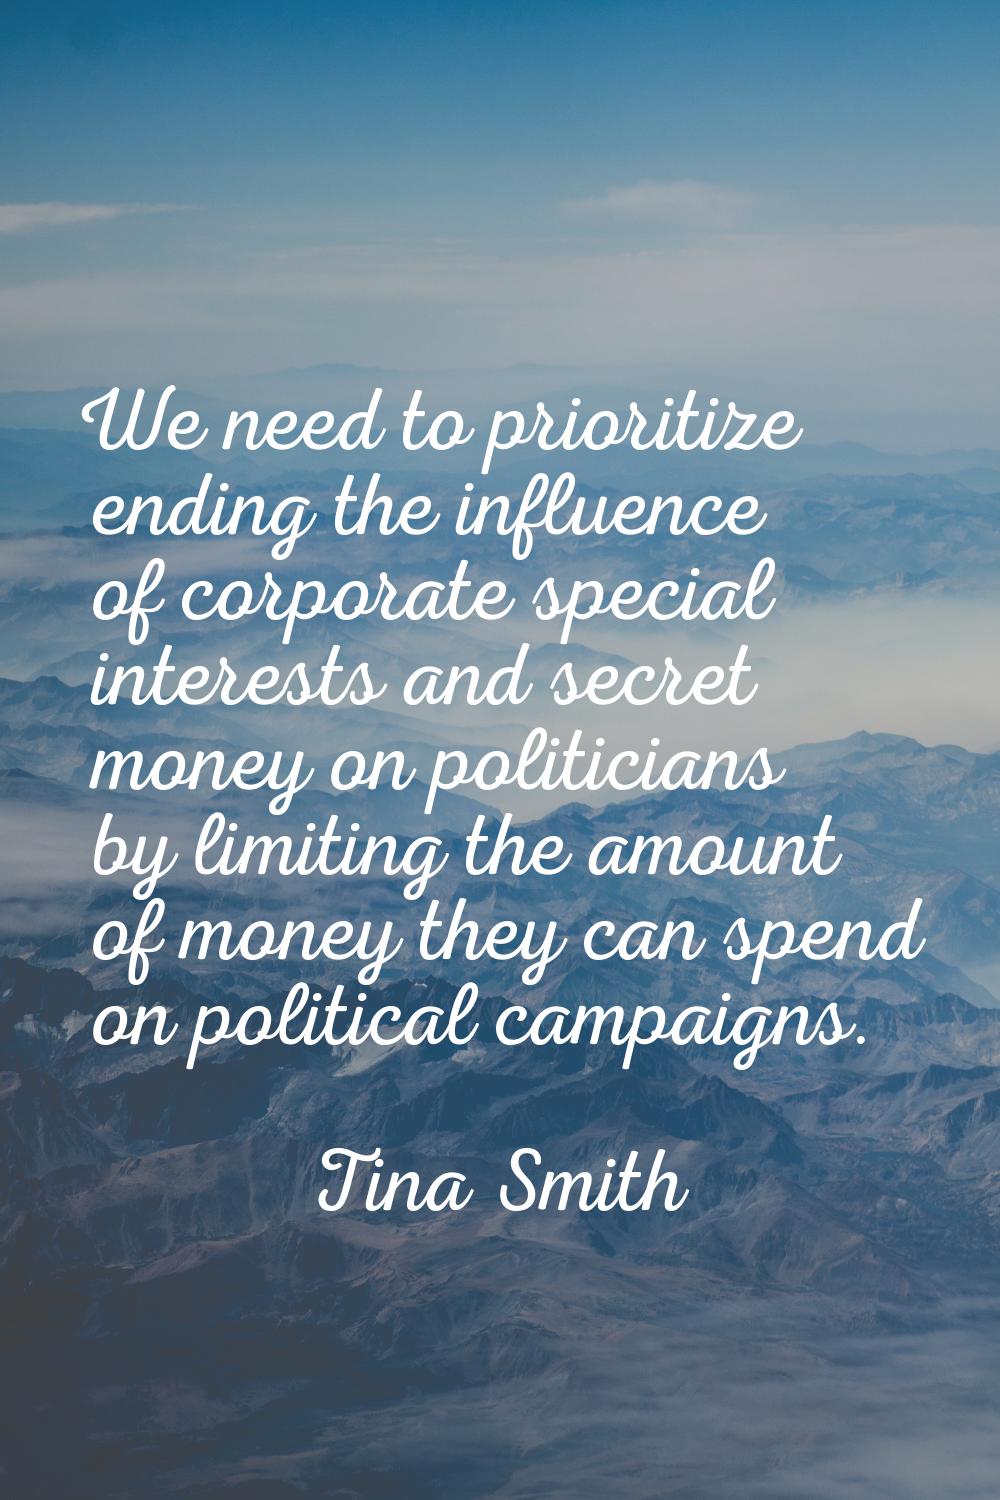 We need to prioritize ending the influence of corporate special interests and secret money on polit